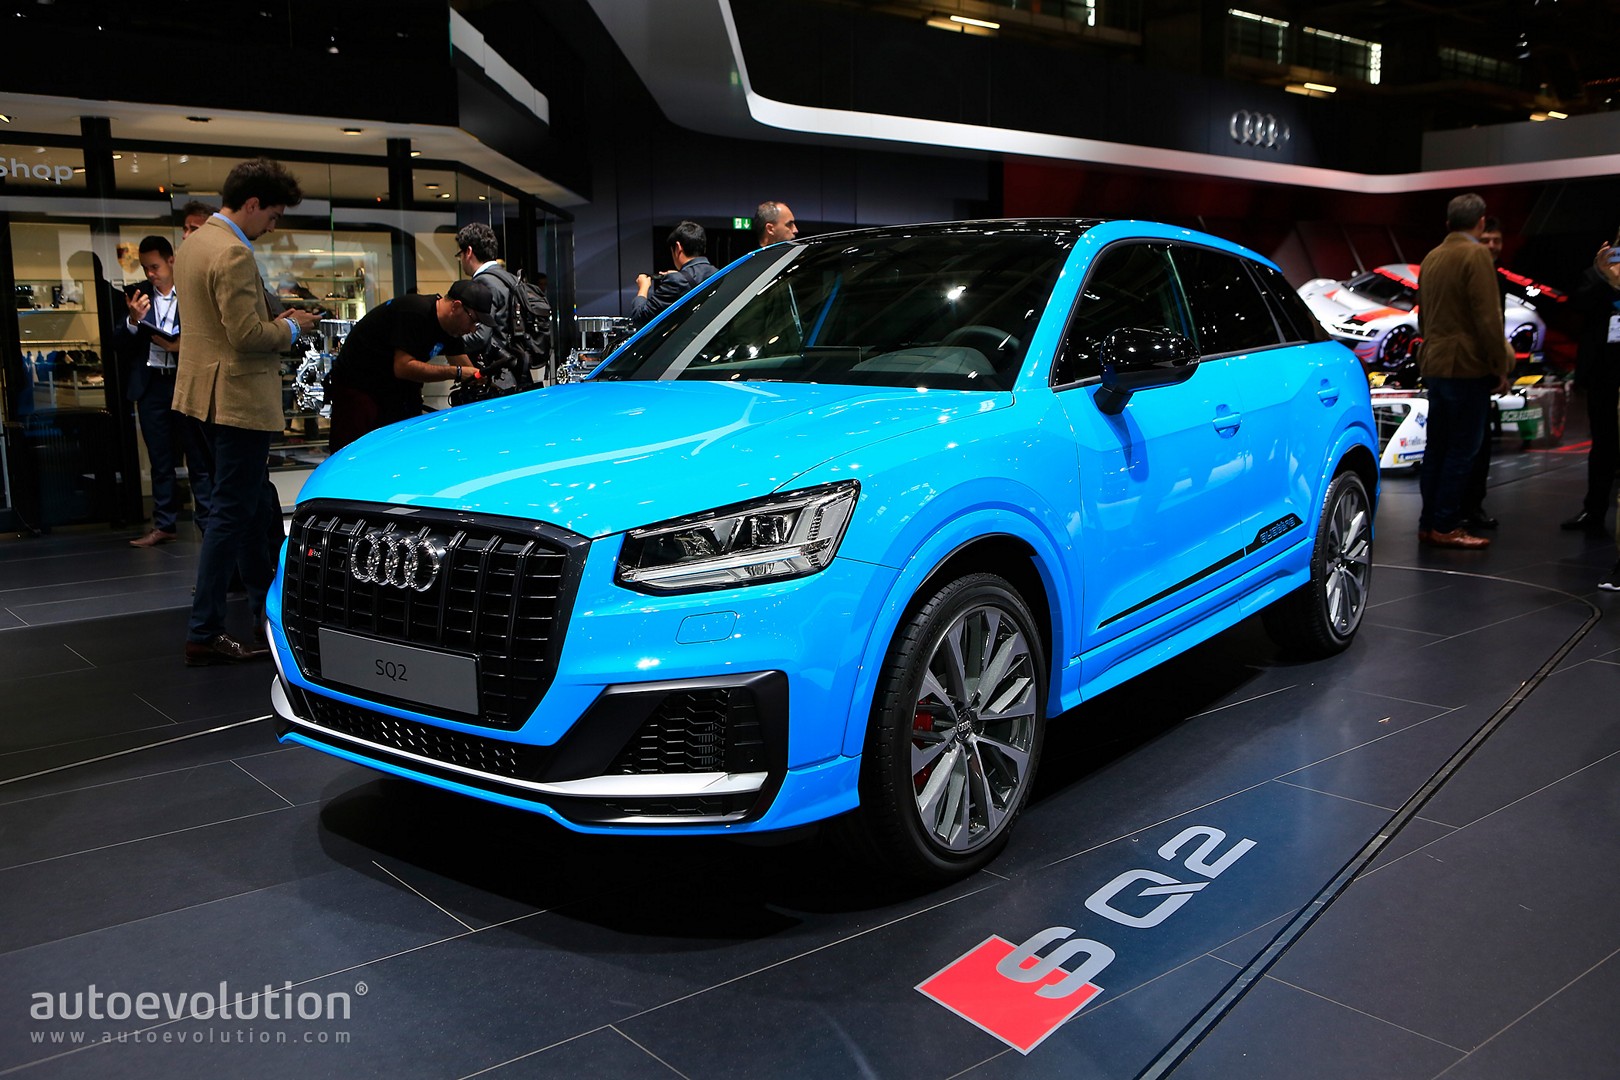 Audi SQ2 Baby Performance SUV in Baby Blue Debuts in Full